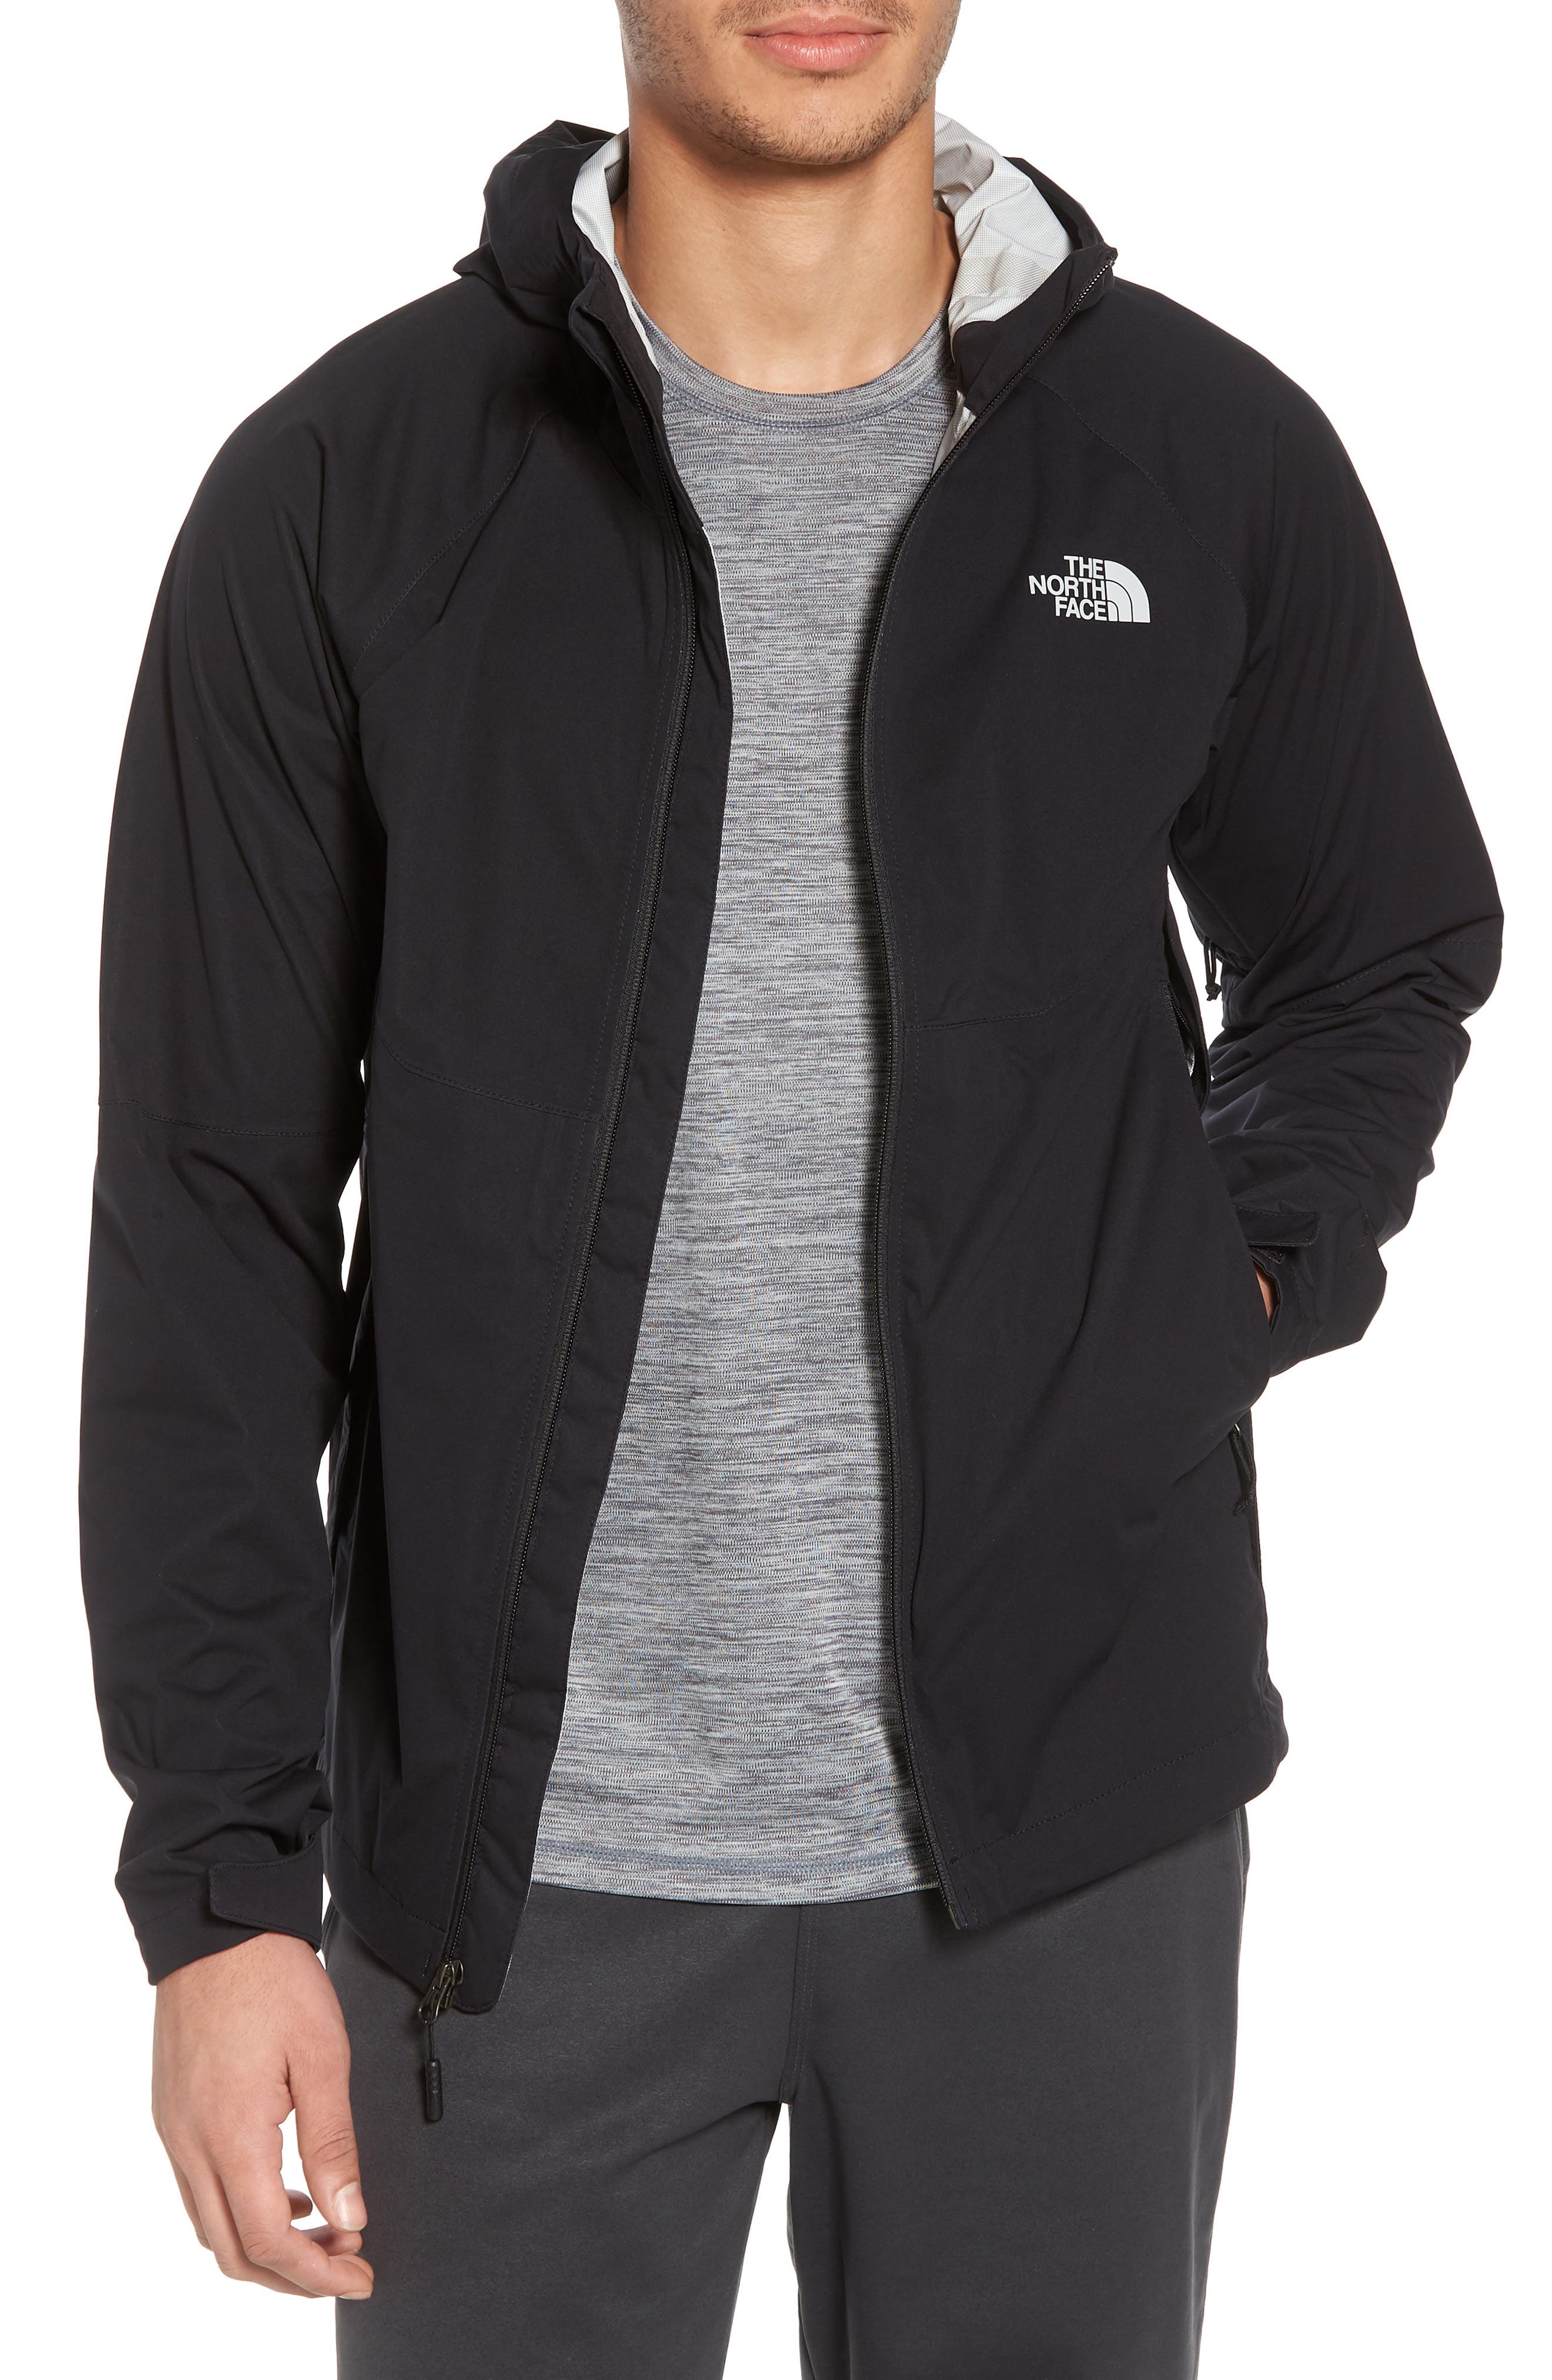 men's allproof stretch jacket review